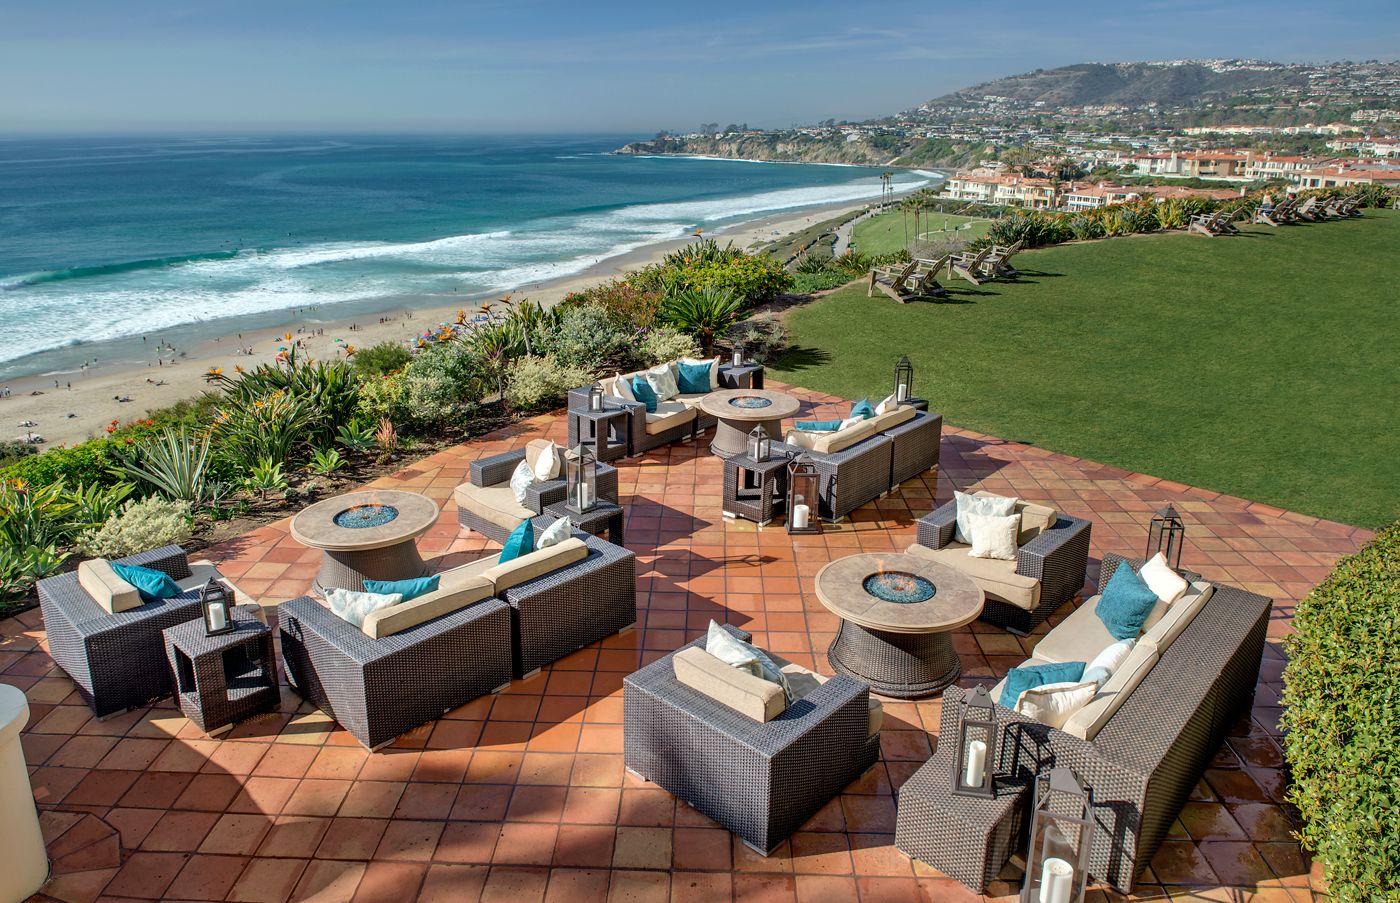 Guests are invited sip on Lloyd Cellars and other fine wines while tasting a variety of delicacies surrounded by the ocean at the beautiful Ritz- Carlton, Laguna Niguel.